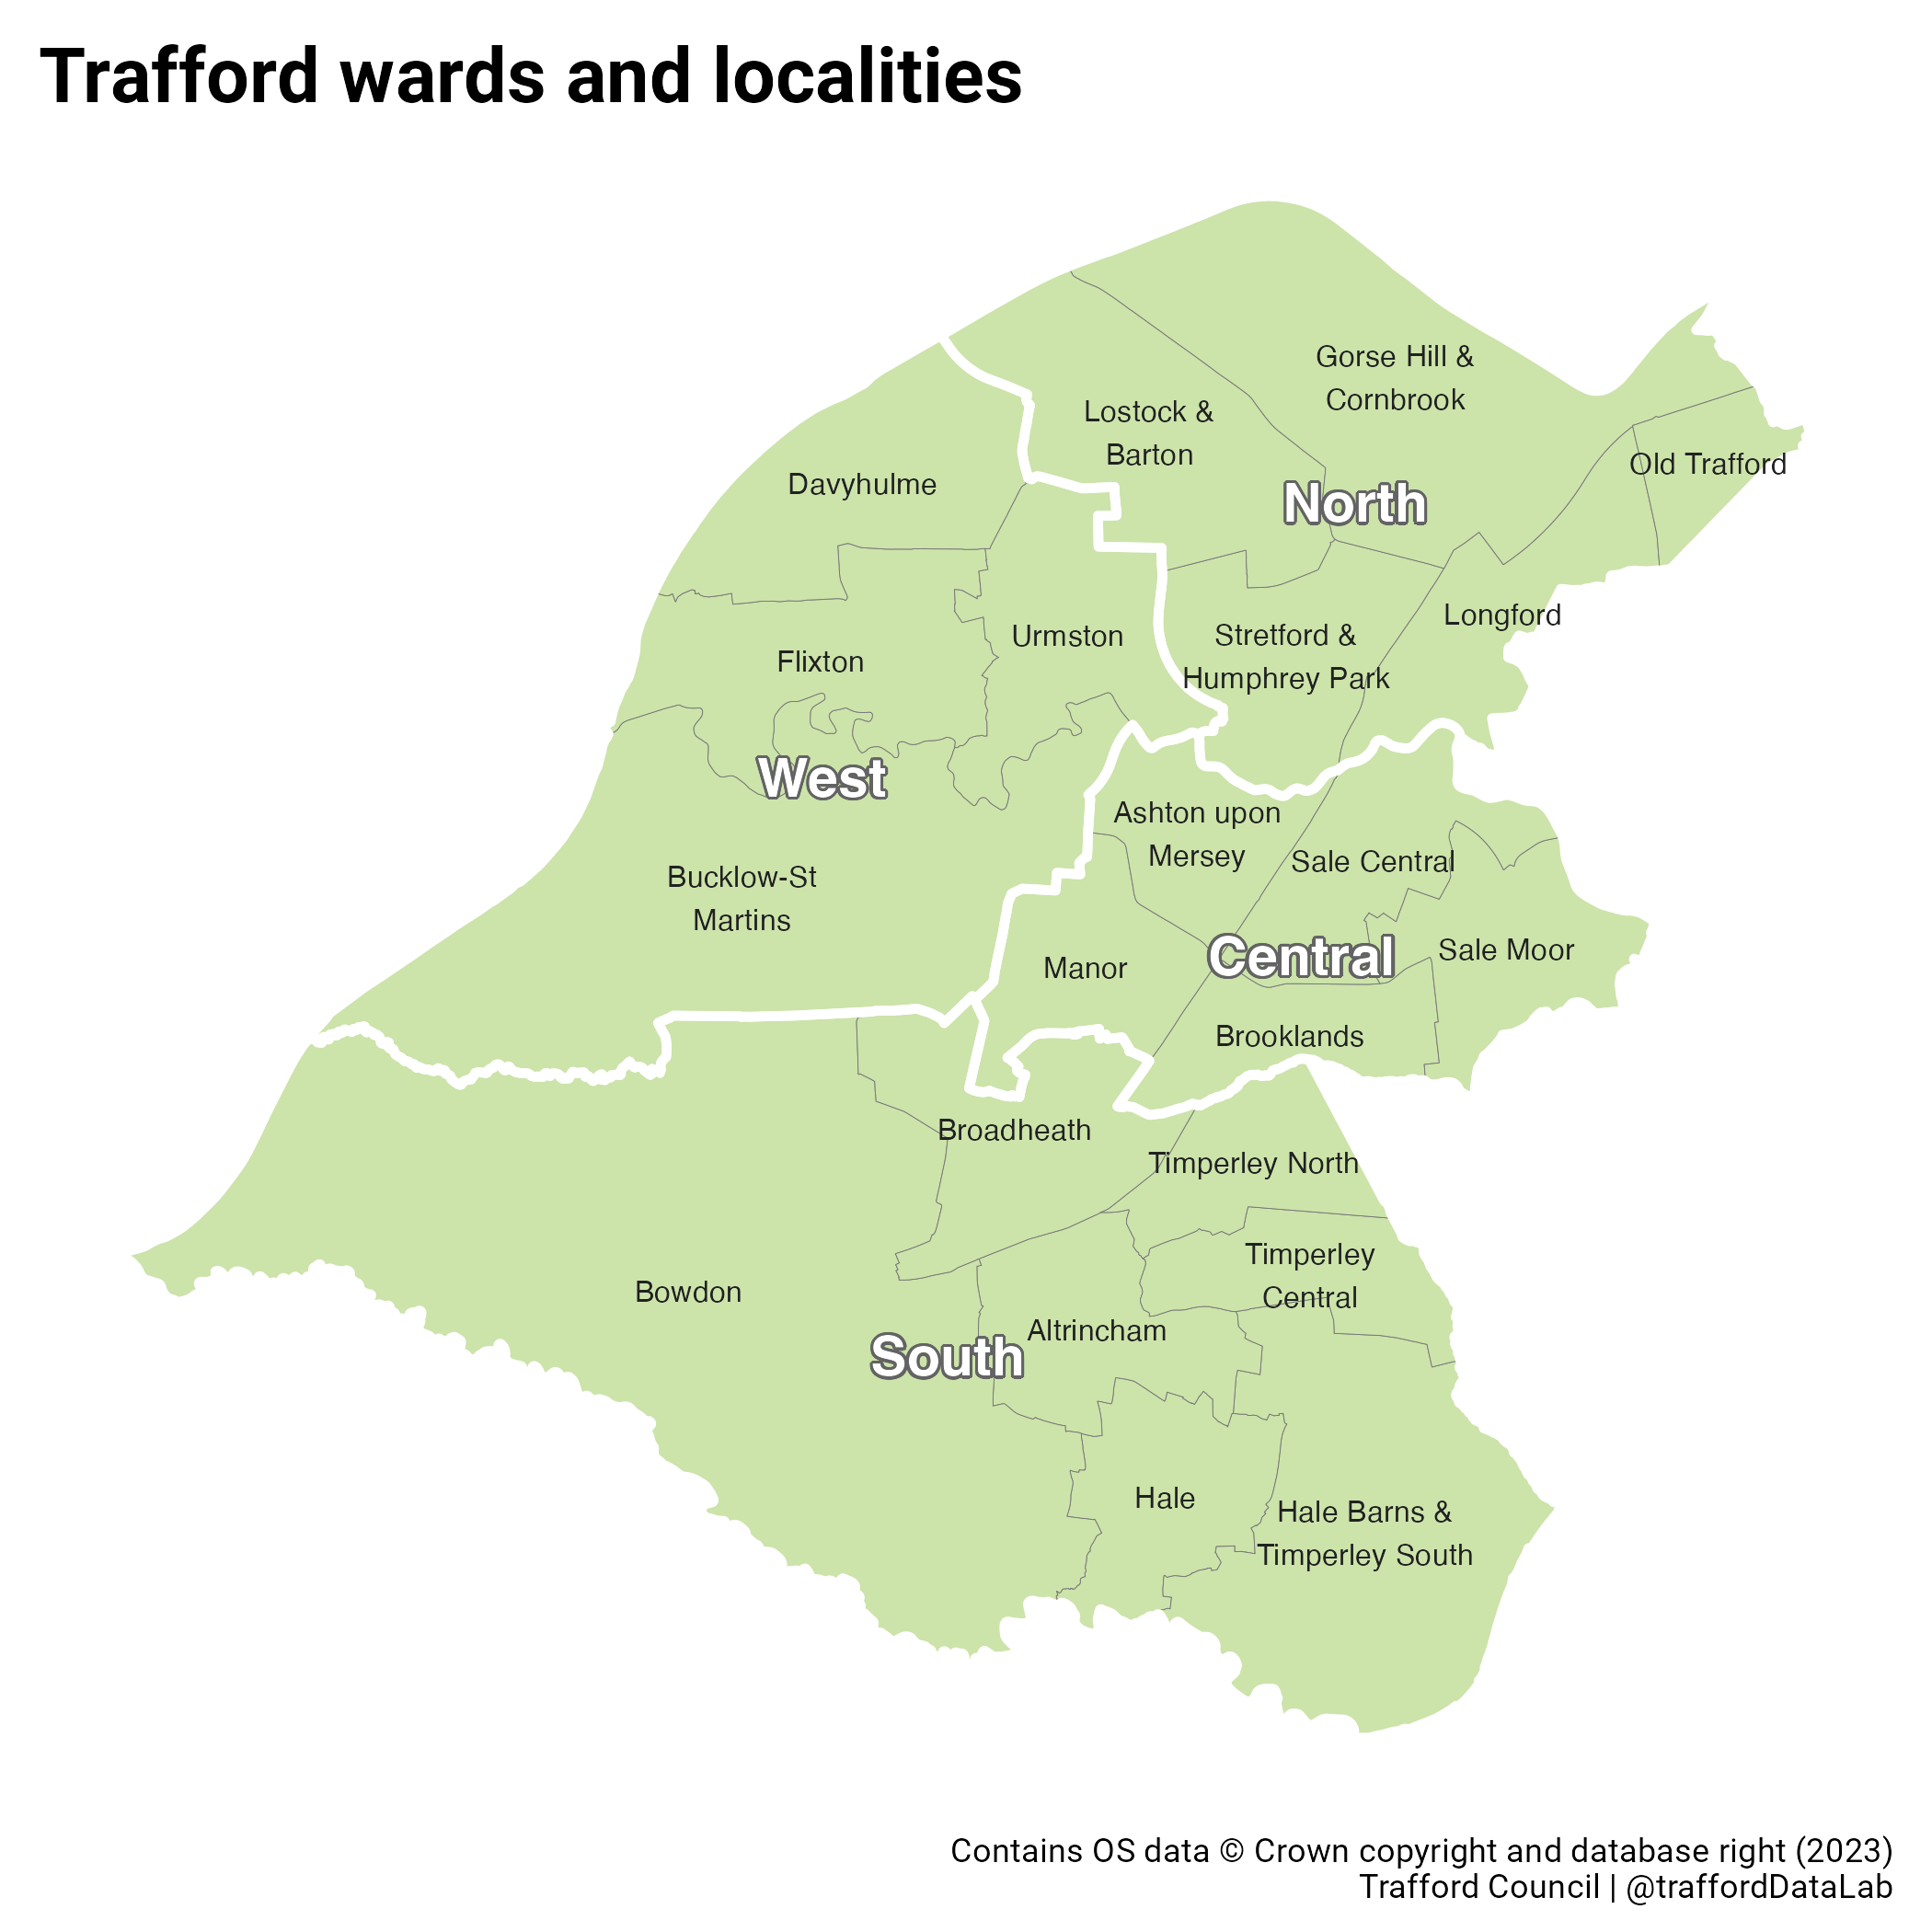 Map of Trafford showing the boundaries of the 21 wards and 4 localities.